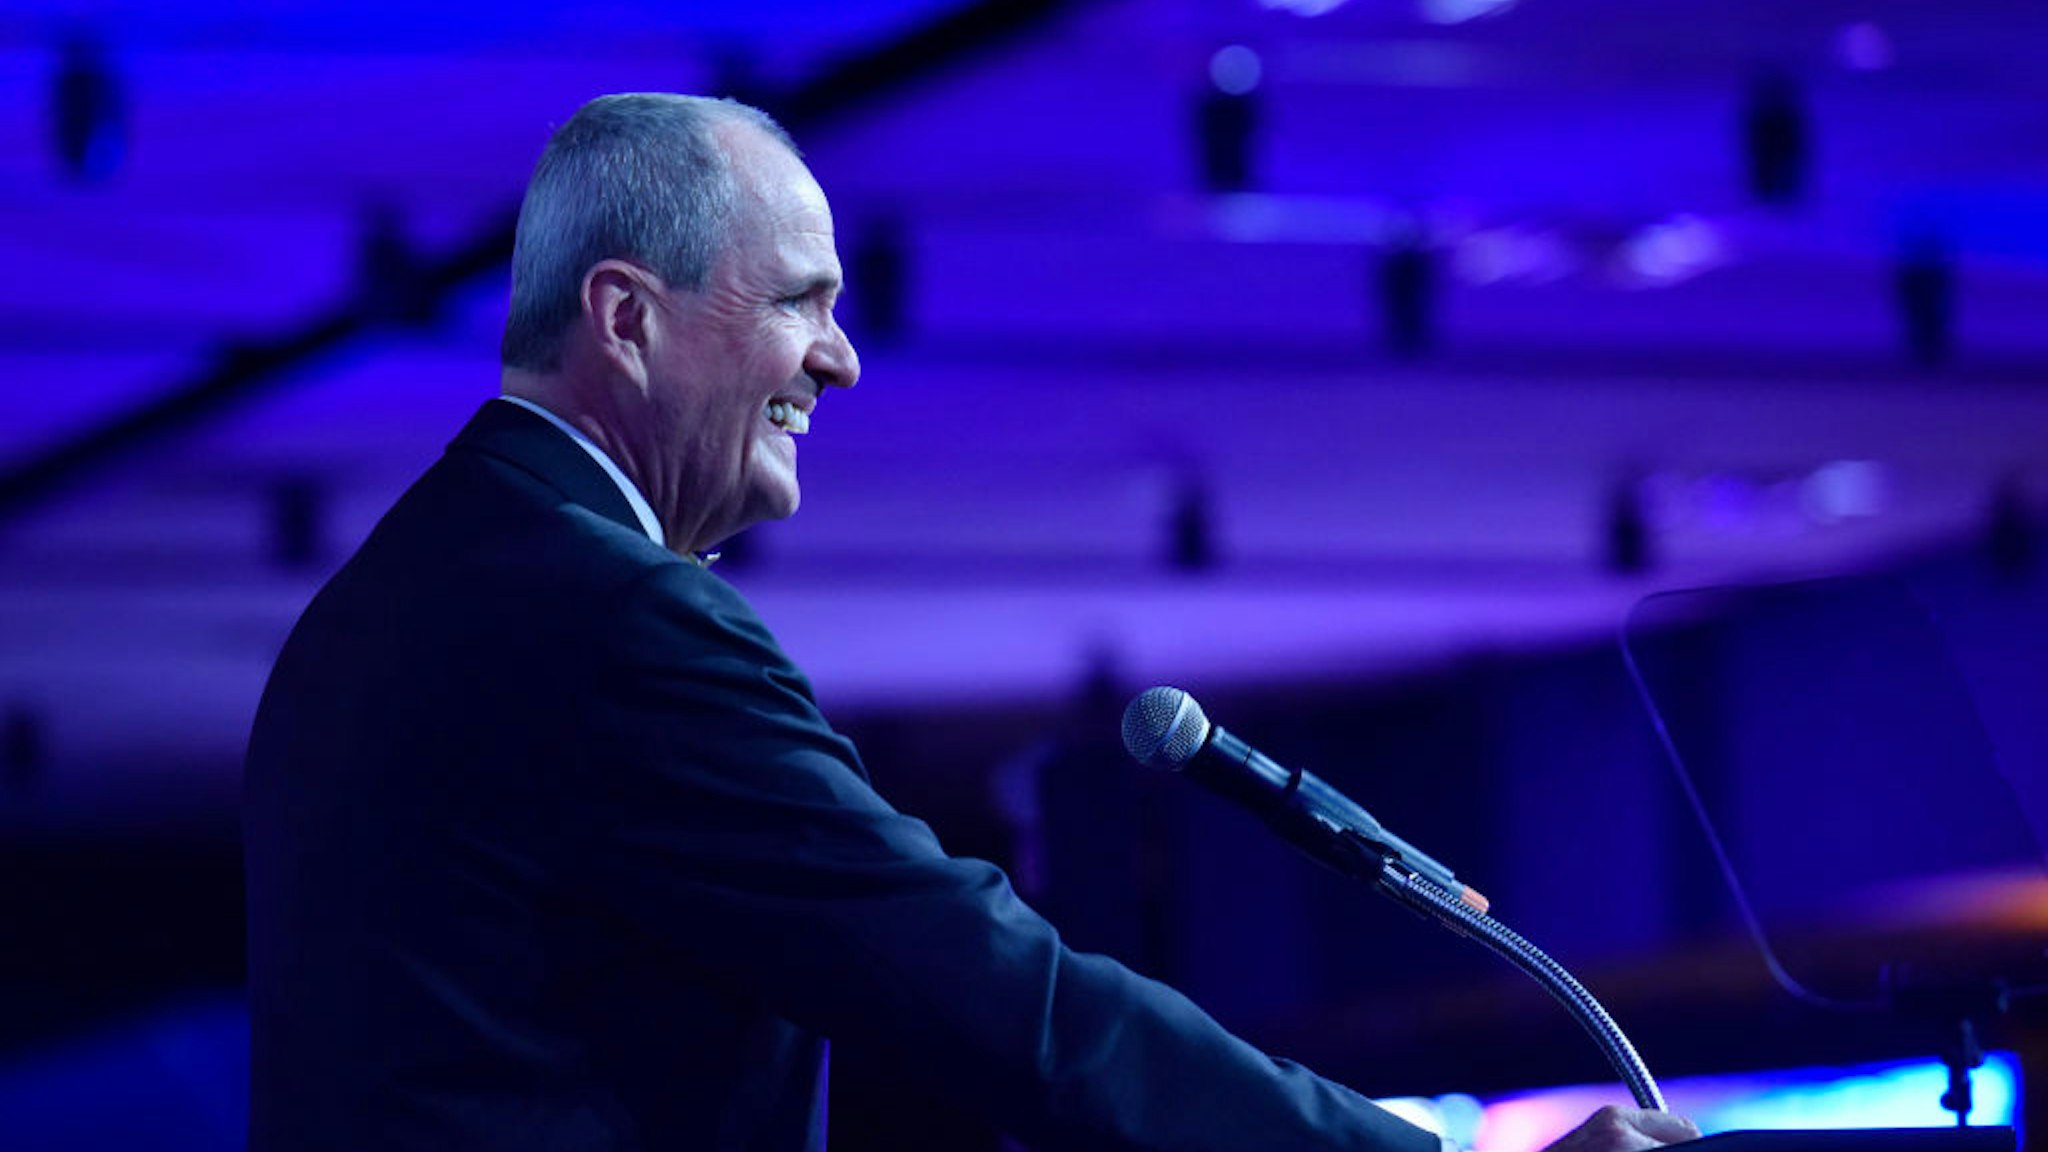 Governor of New Jersey Phil Murphy speaks onstage during the Liberty Science Center Genius Gala 8 at Liberty Science Center on May 13, 2019 in Jersey City, New Jersey.